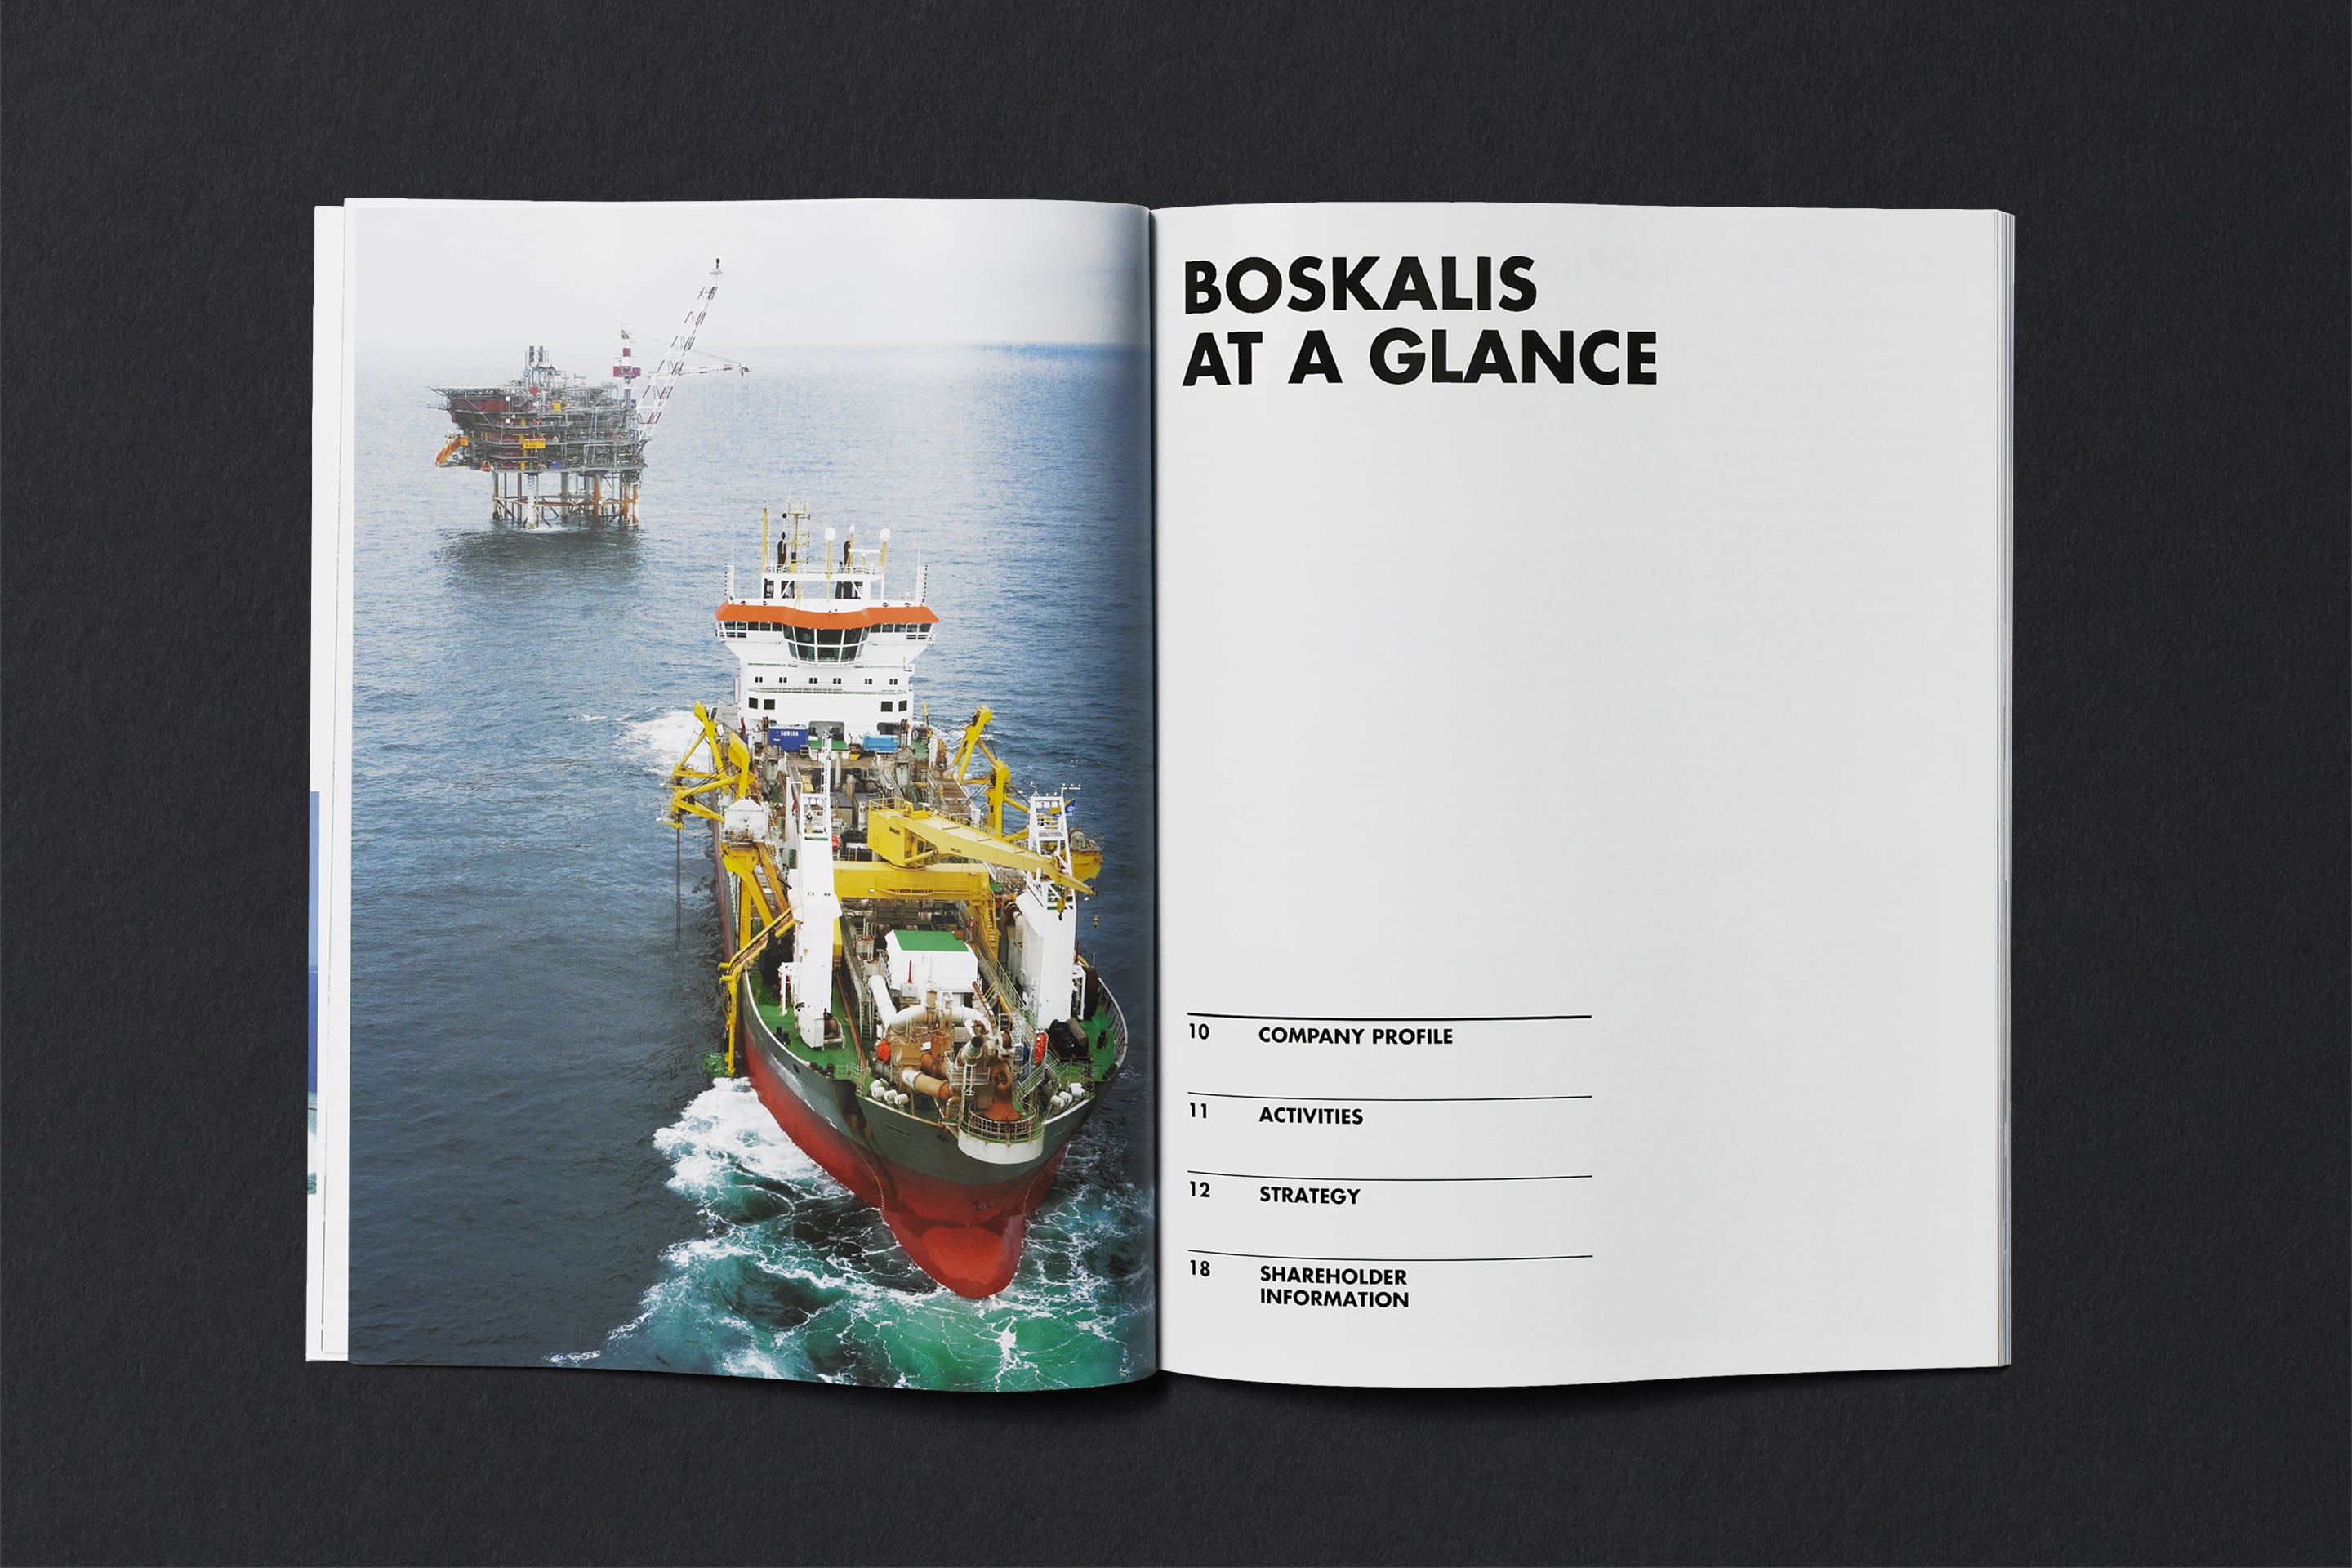 studio dumbar design visual brand identity for Boskalis the leading dredging and marine experts Annual Report print design